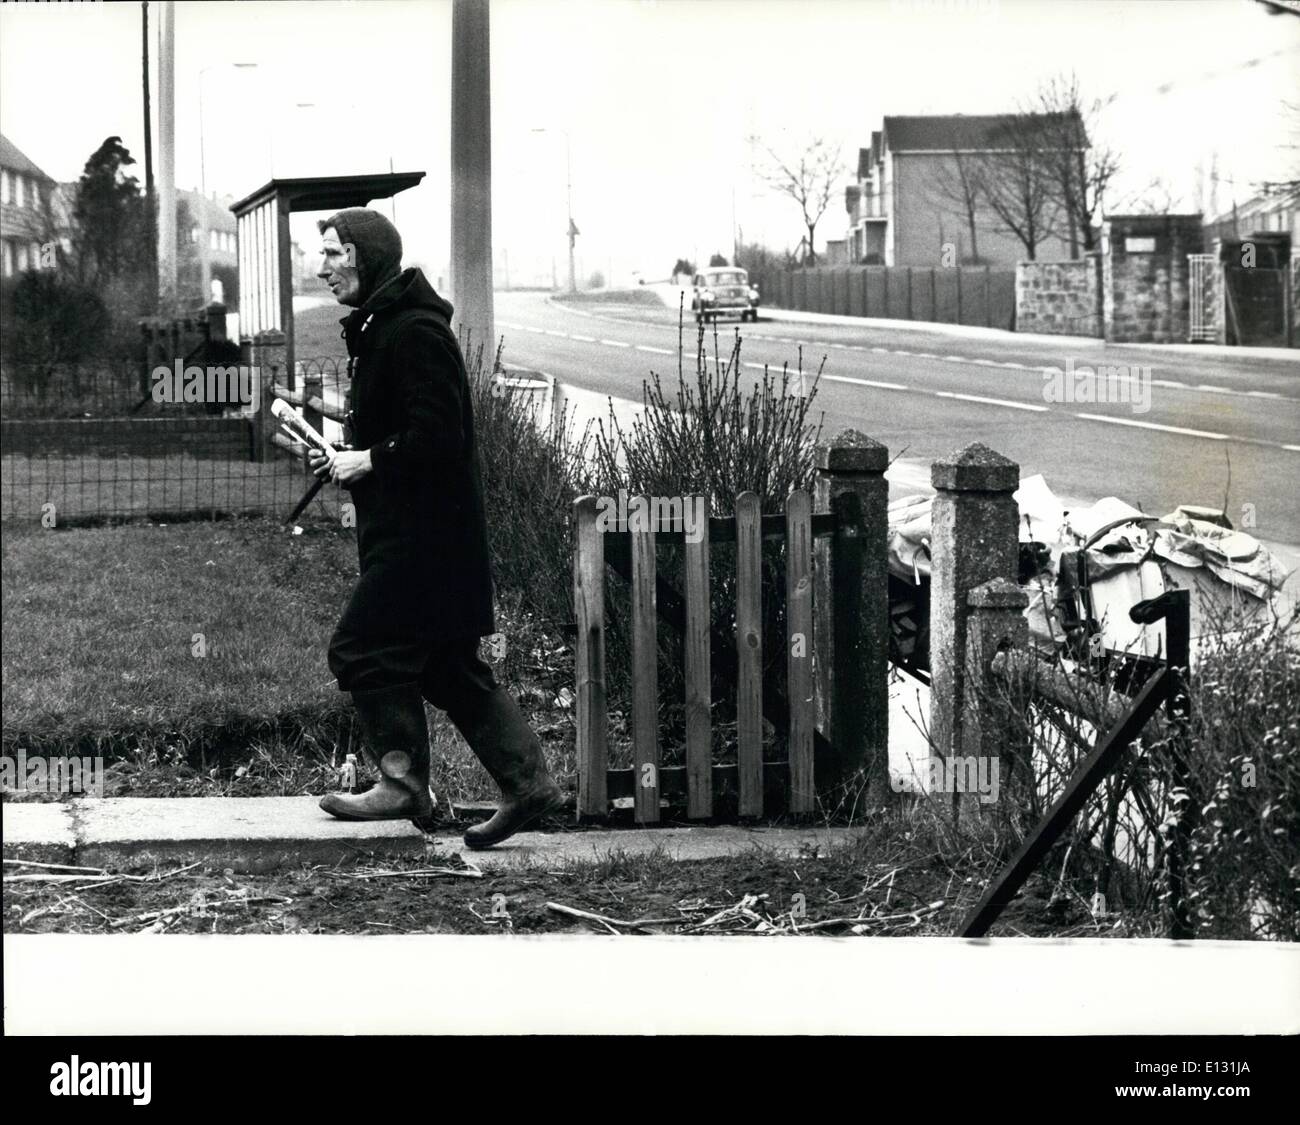 Feb. 26, 2012 - With the bike parked. Alan makes a delivery on his morning 20 mile newspaper round. Stock Photo